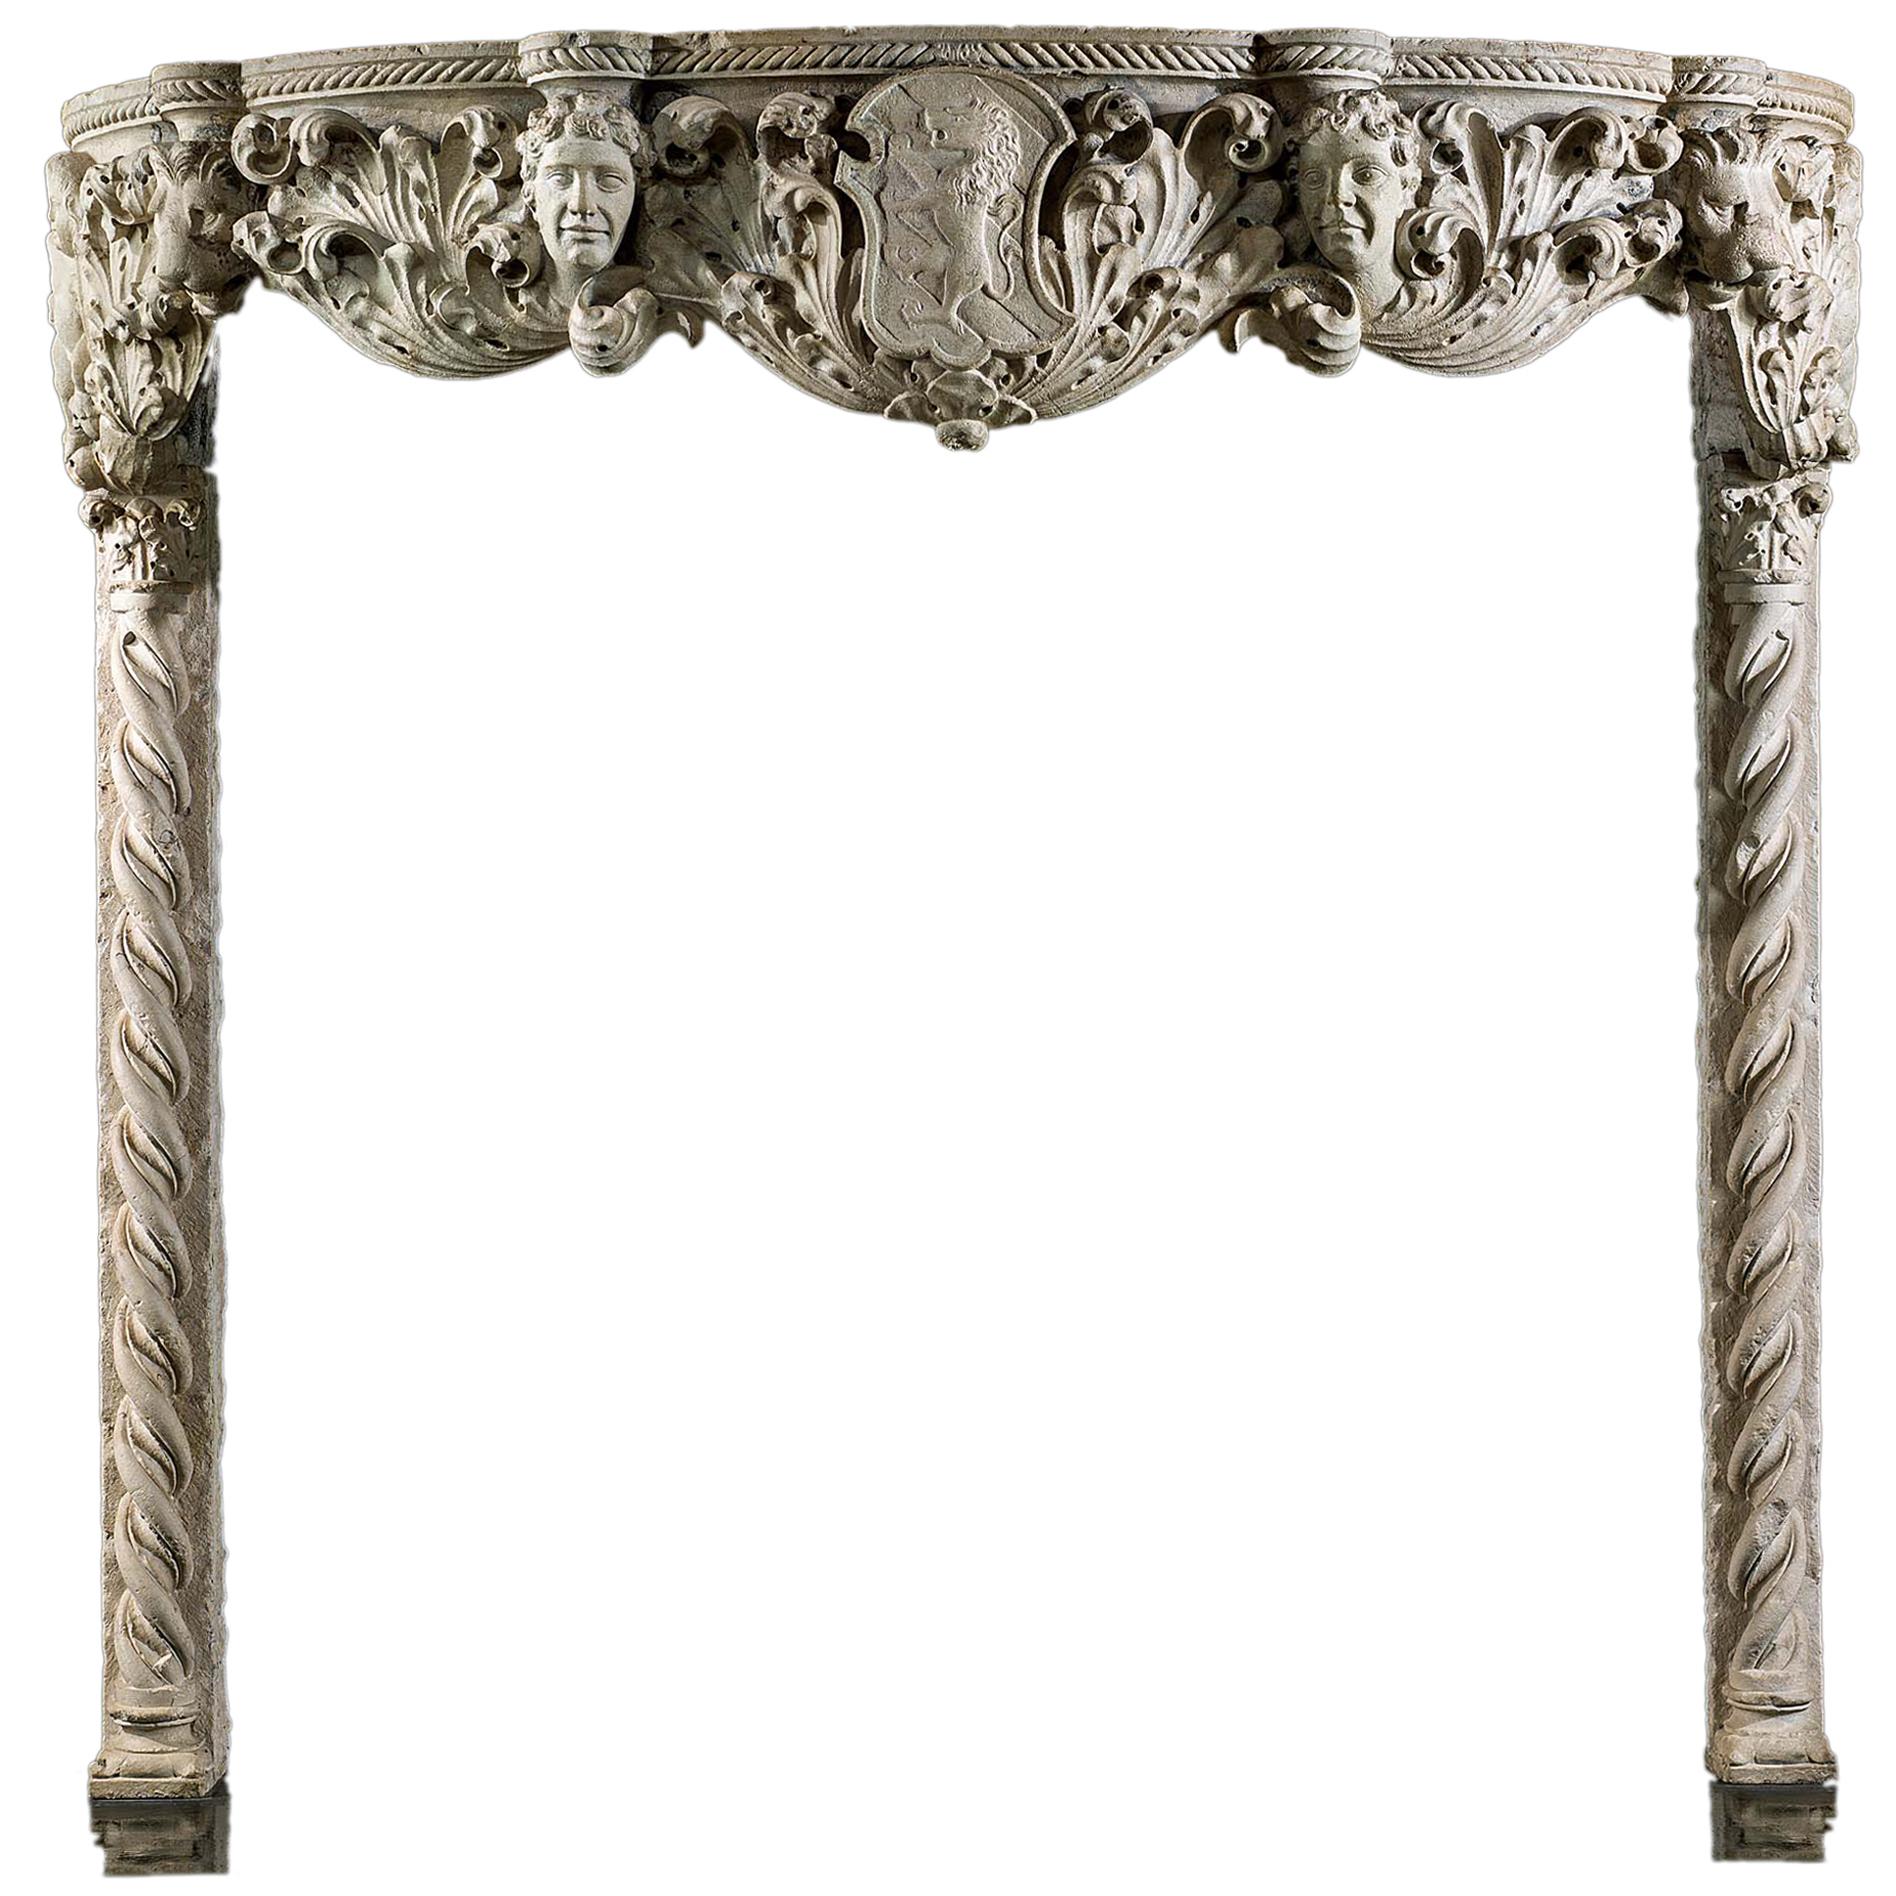 Venetian Renaissance Antique Fireplace from the 15th Century For Sale